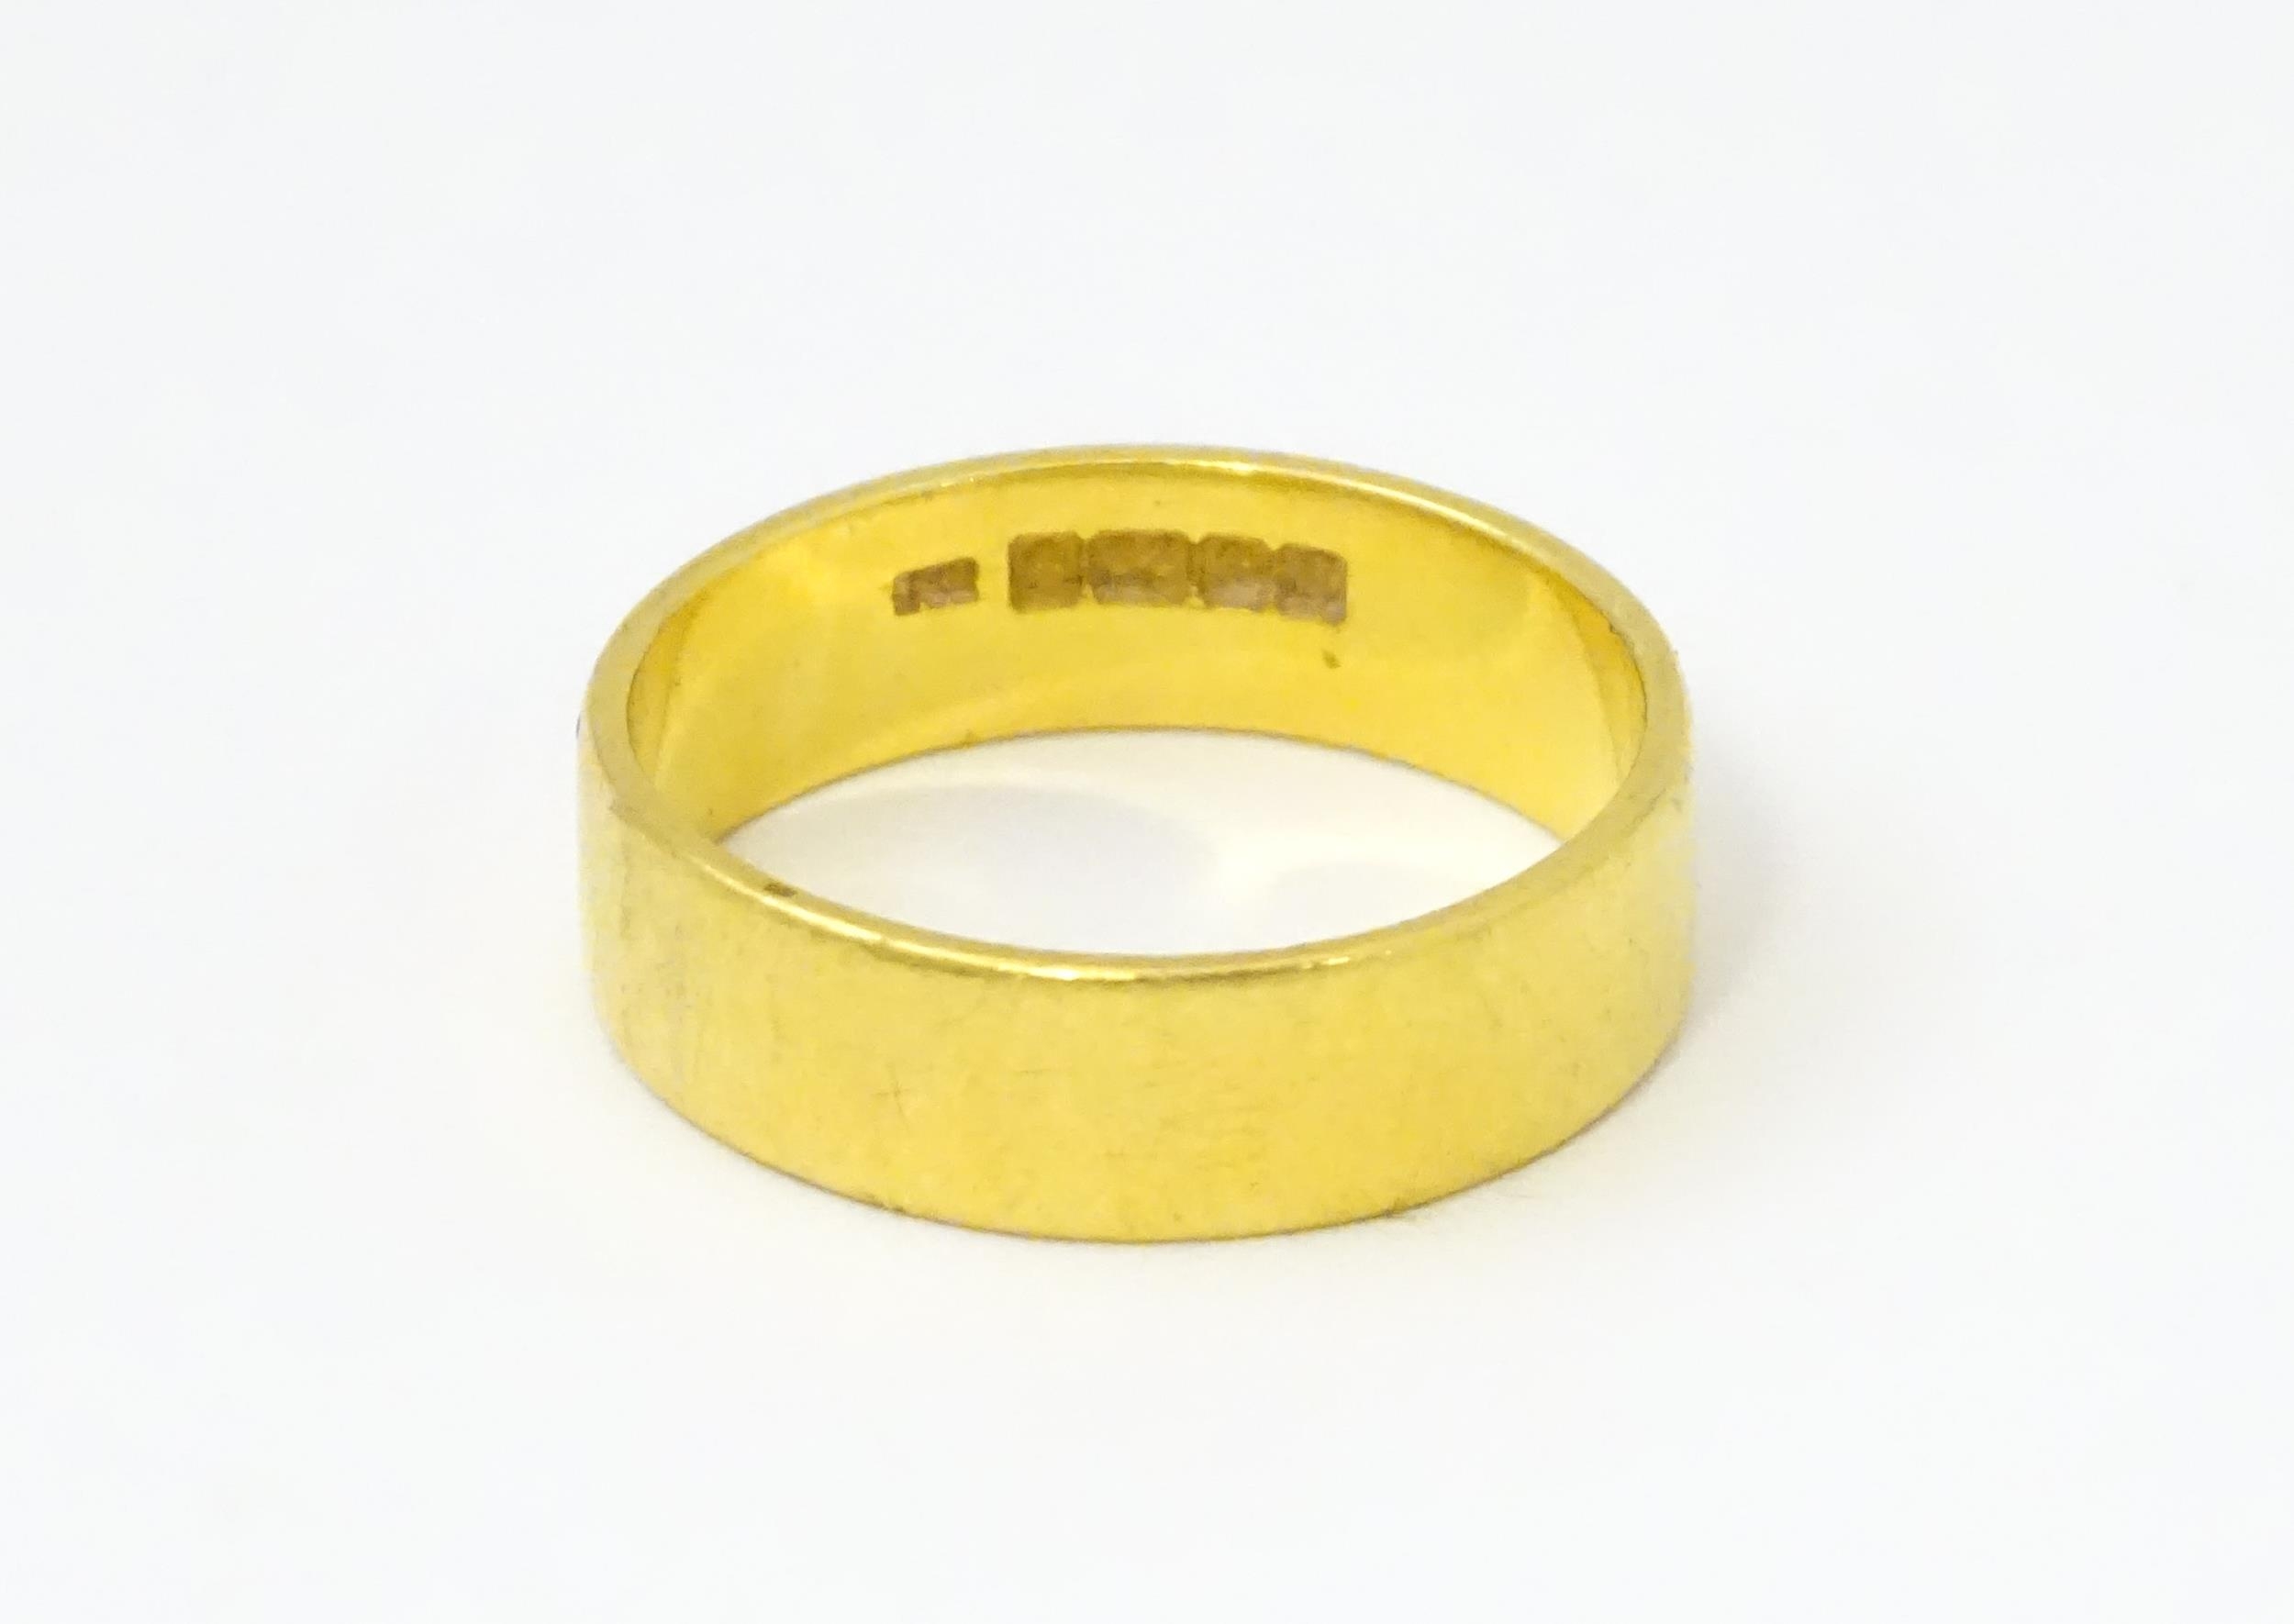 A 22ct gold ring / wedding band. Ring size approx. M 1/2 Please Note - we do not make reference to